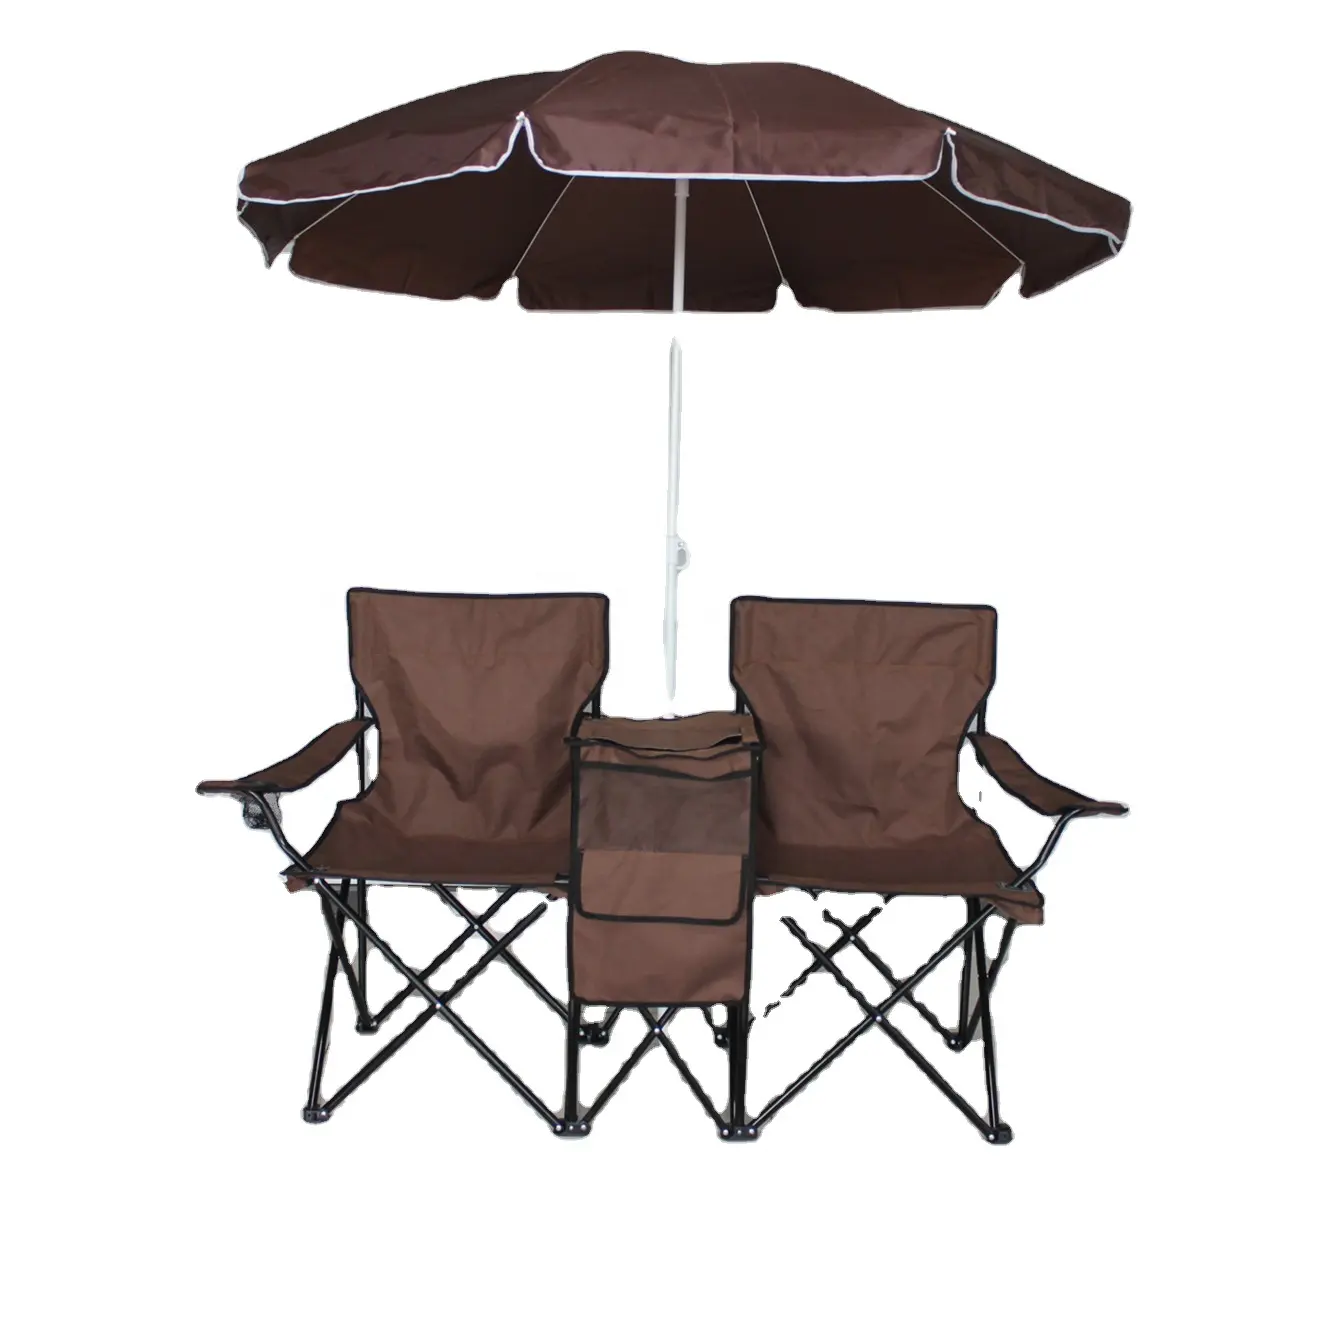 Two Person Beach Chairs Outdoor Picnic Camping Twin Chair Portable Folding Lover armchair With Umbrella